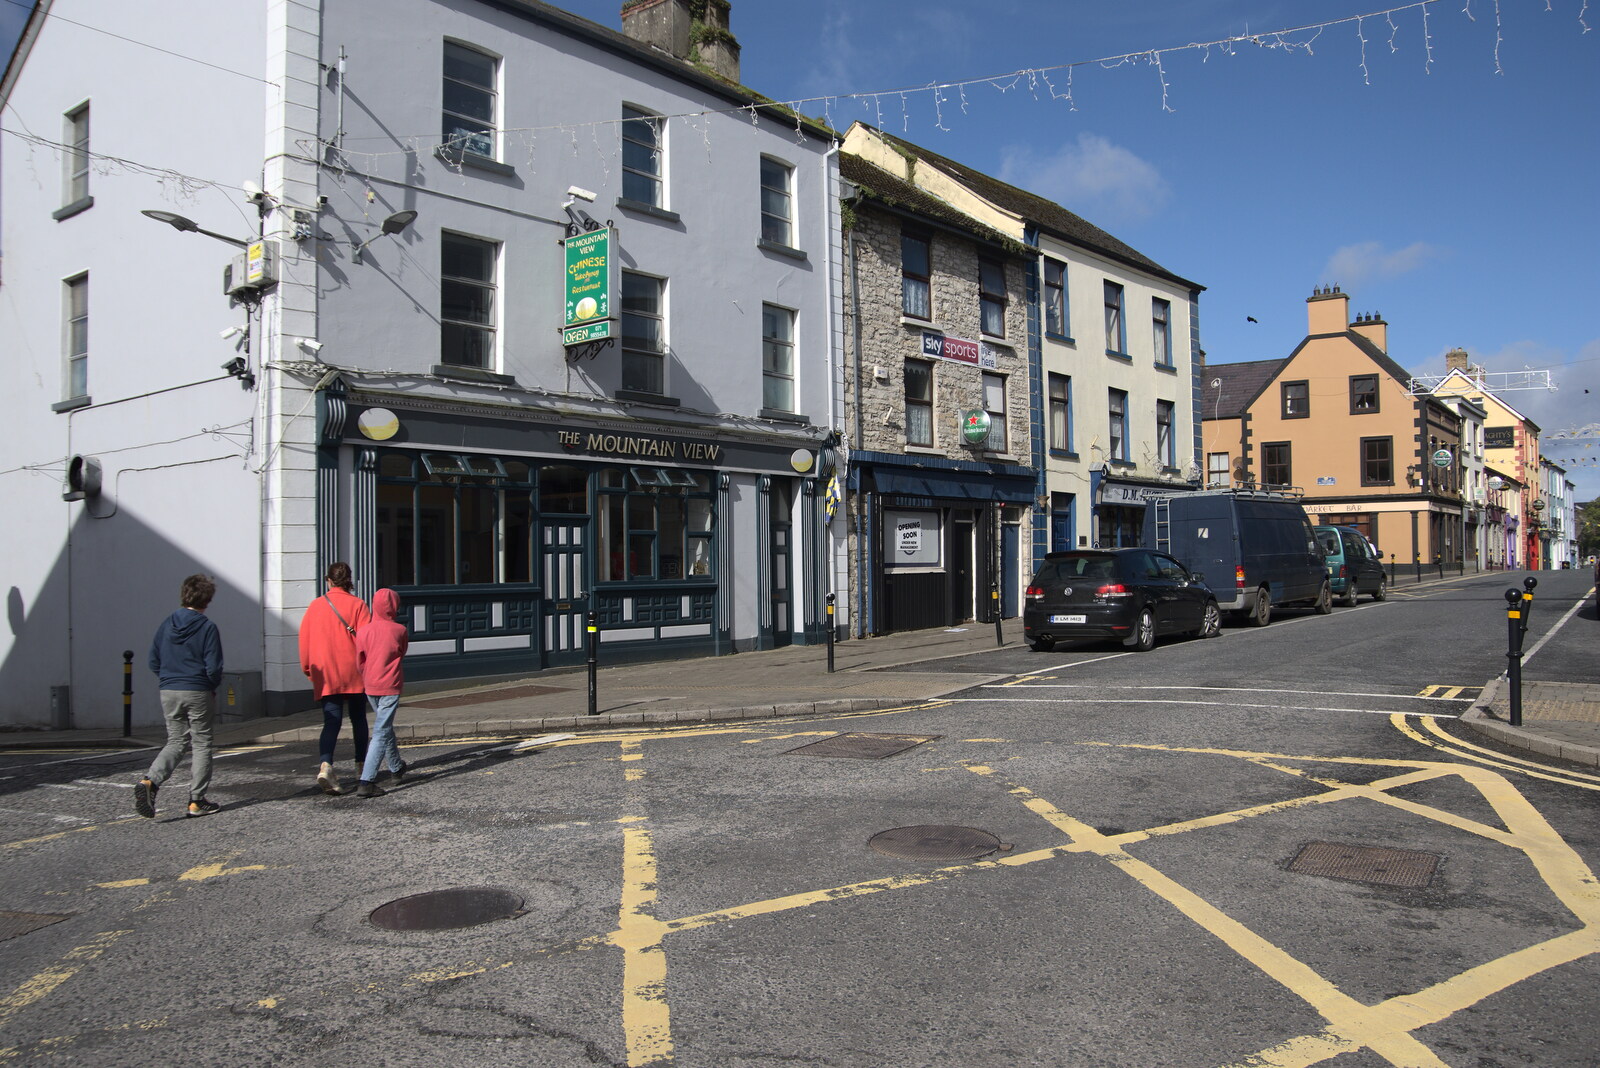 On the streets of Manorhamilton from Manorhamilton and Bundoran, Leitrim and Donegal, Ireland - 16th April 2022